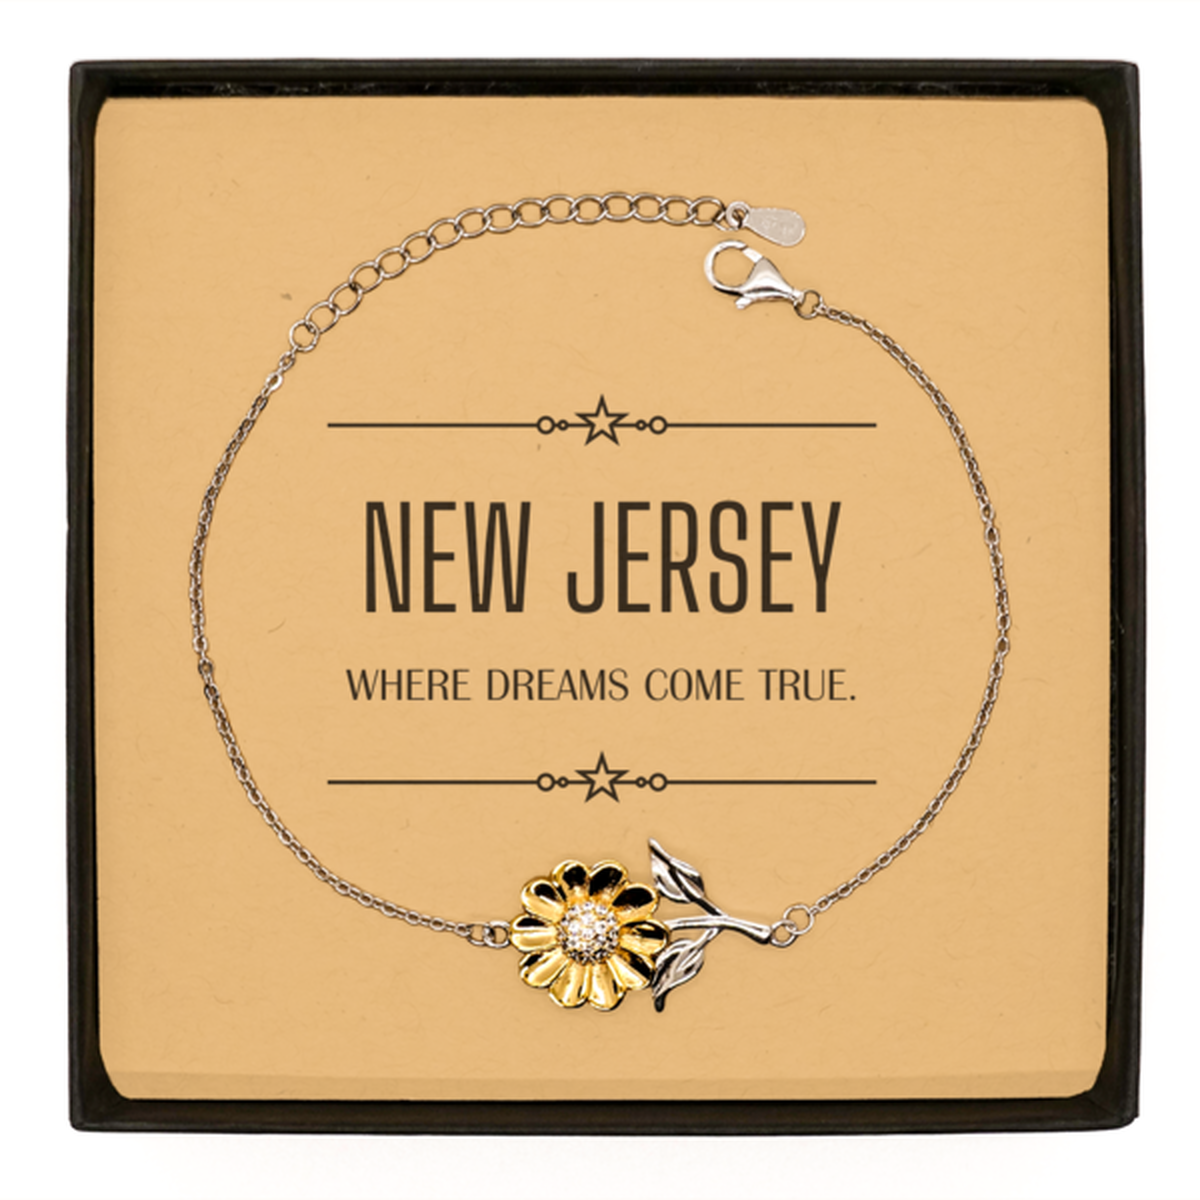 Love New Jersey State Sunflower Bracelet, New Jersey Where dreams come true, Birthday Inspirational Gifts For New Jersey Men, Women, Friends